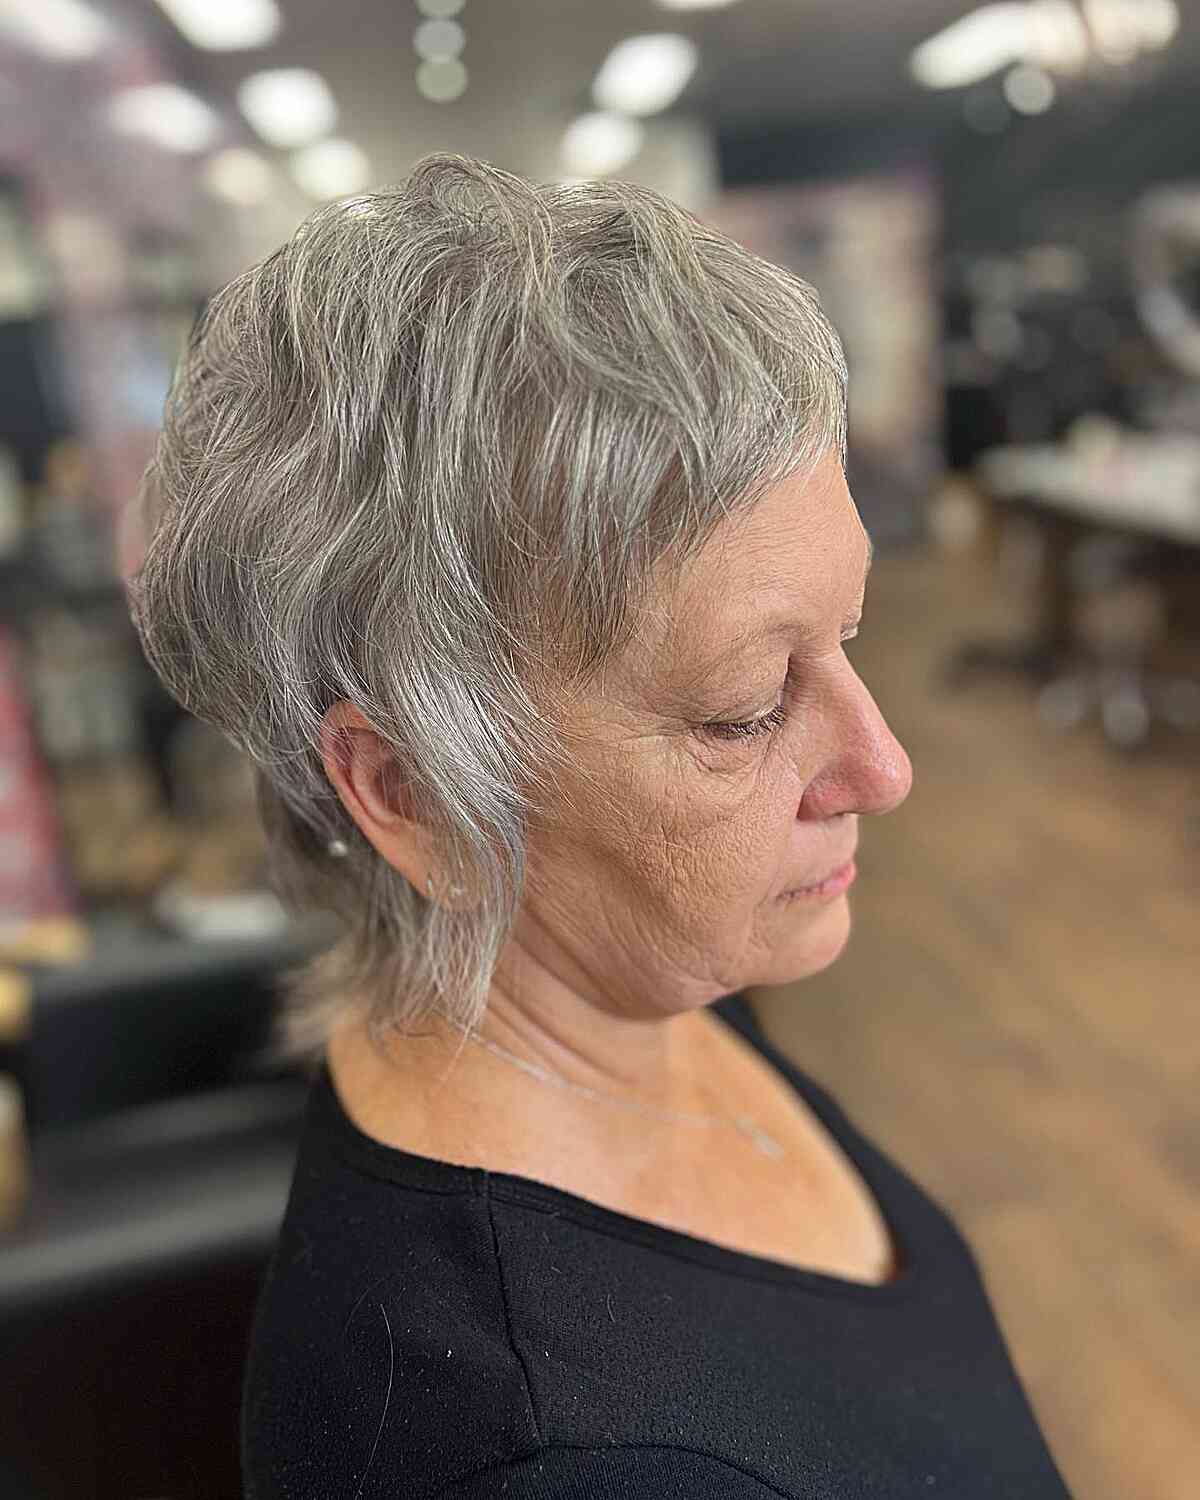 Shagged Pixie with Short Layers for Senior Women In Their 70s